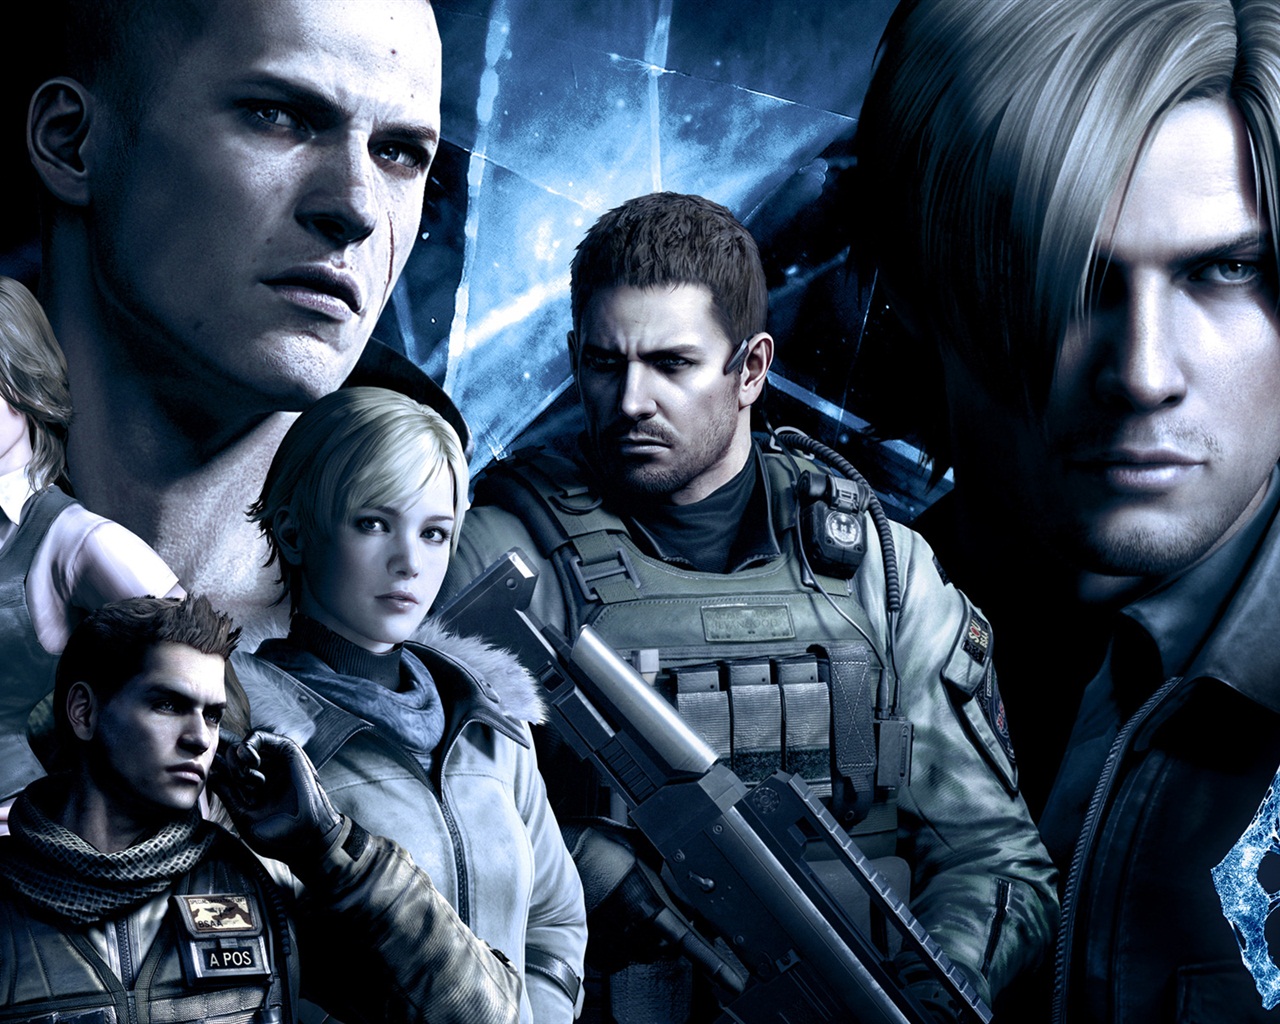 Resident Evil 6 HD game wallpapers #9 - 1280x1024